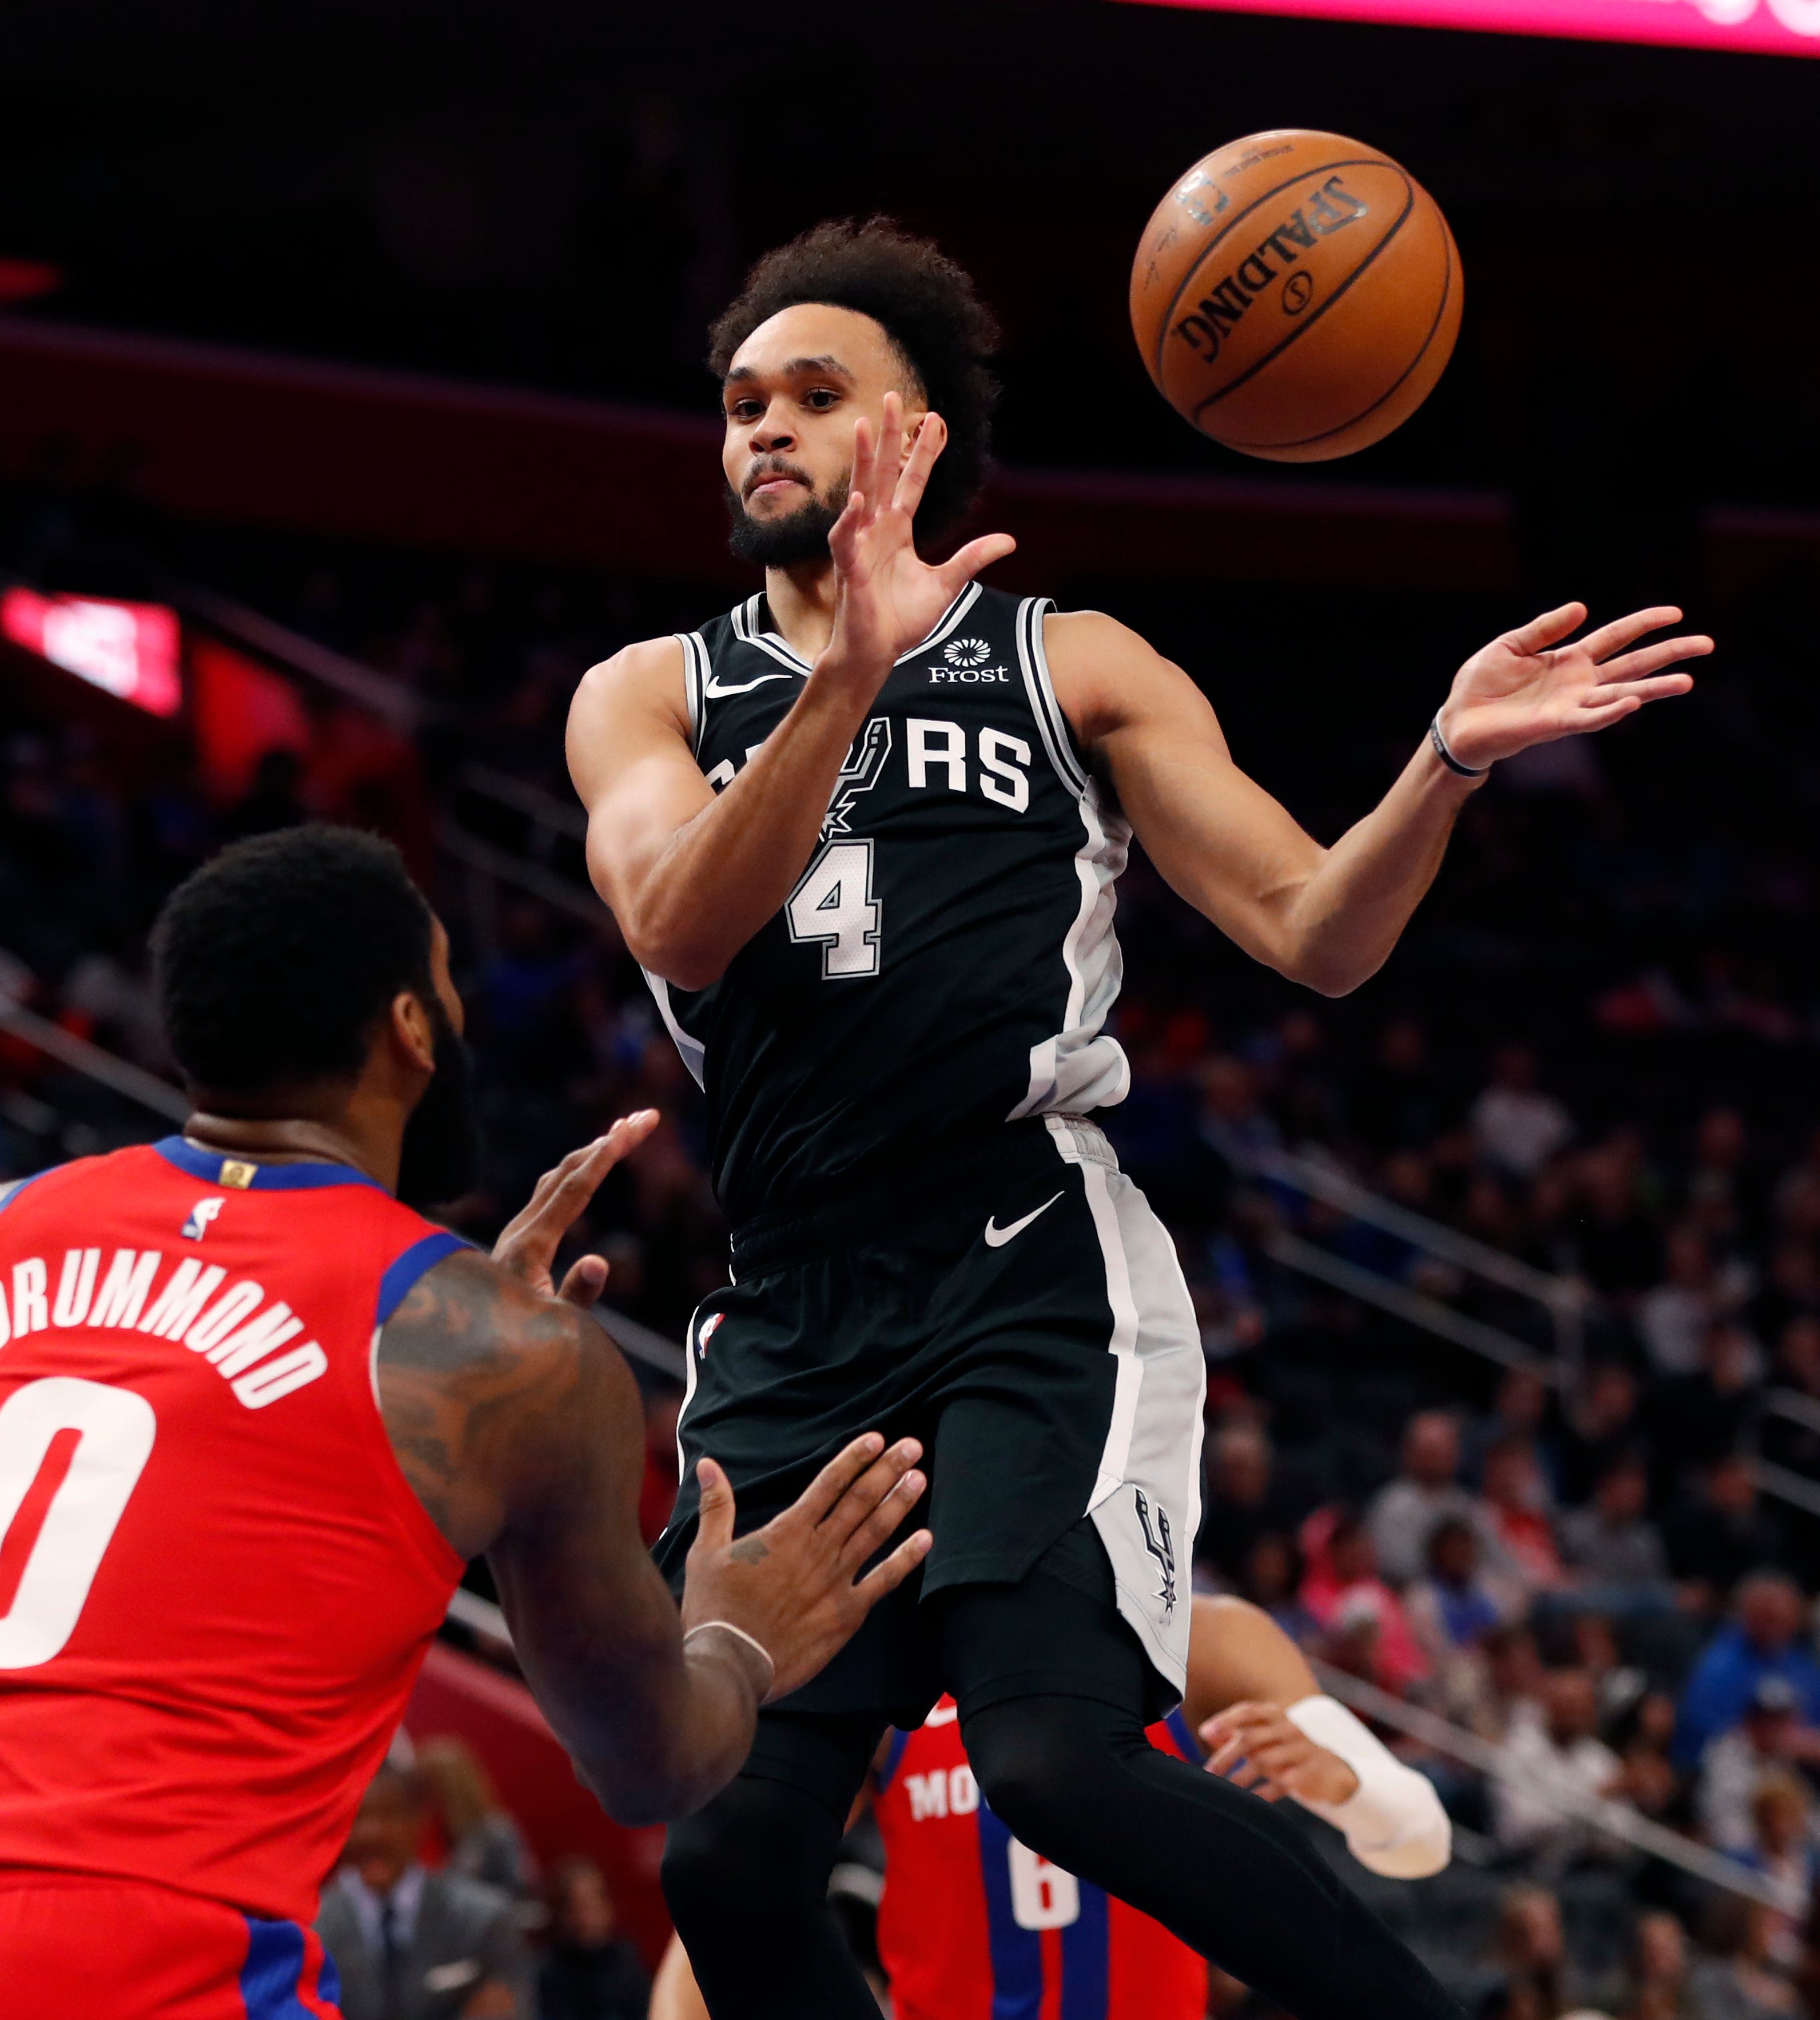 San Antonio Spurs guard Derrick White passes in front of Detroit Pistons center Andre Drummond during the first half.